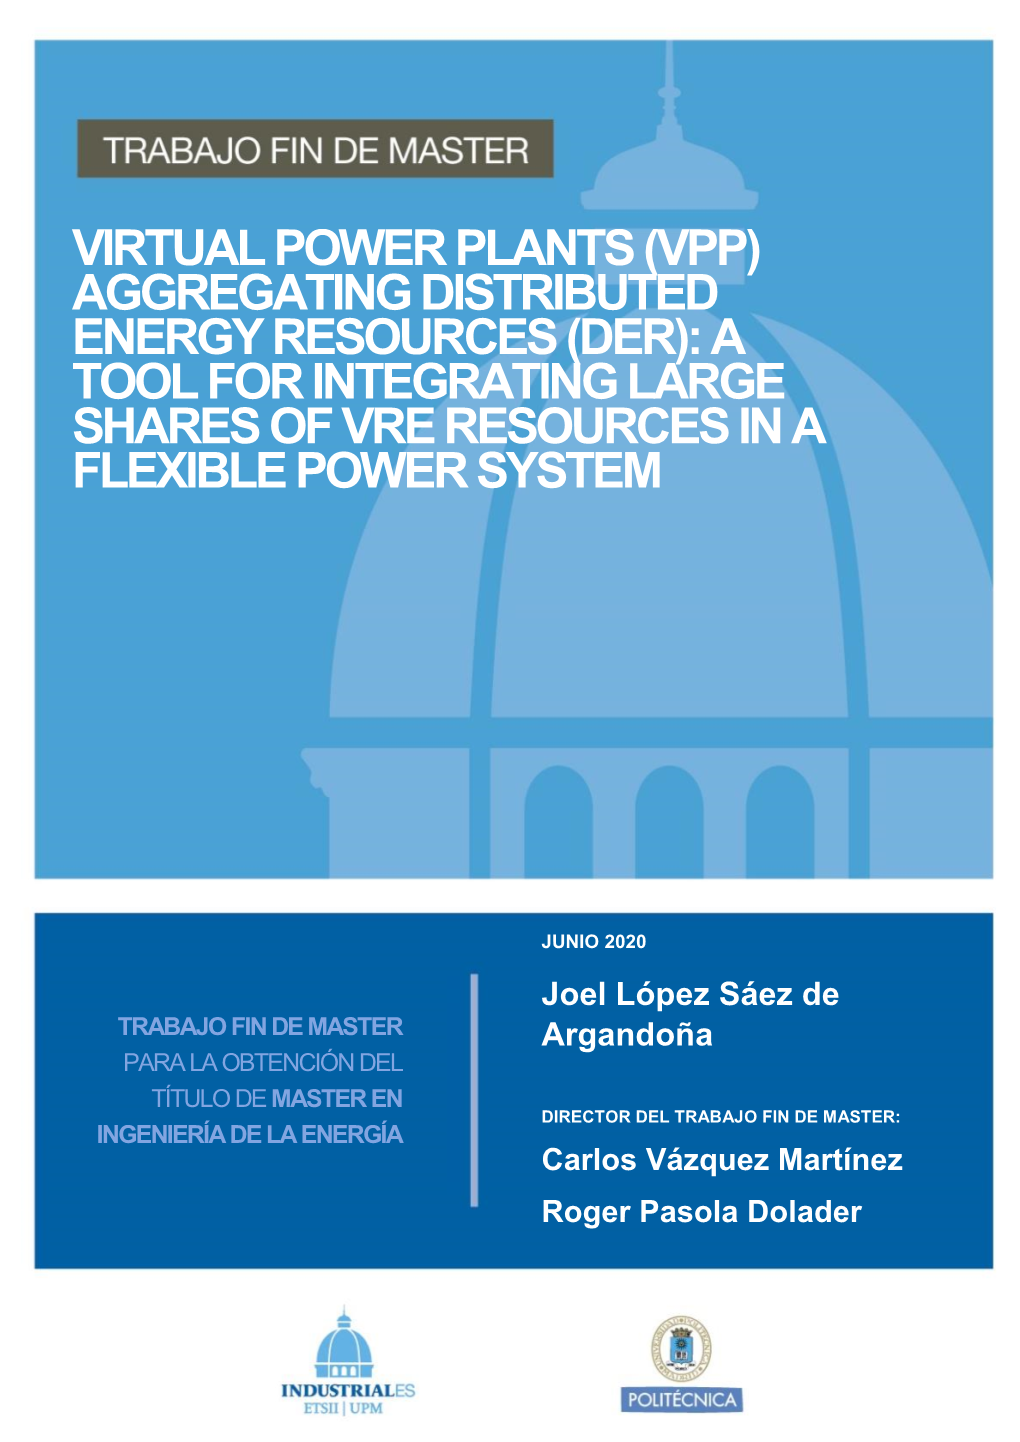 Virtual Power Plants (Vpp) Aggregating Distributed Energy Resources (Der): a Tool for Integrating Large Shares of Vre Resources in a Flexible Power System